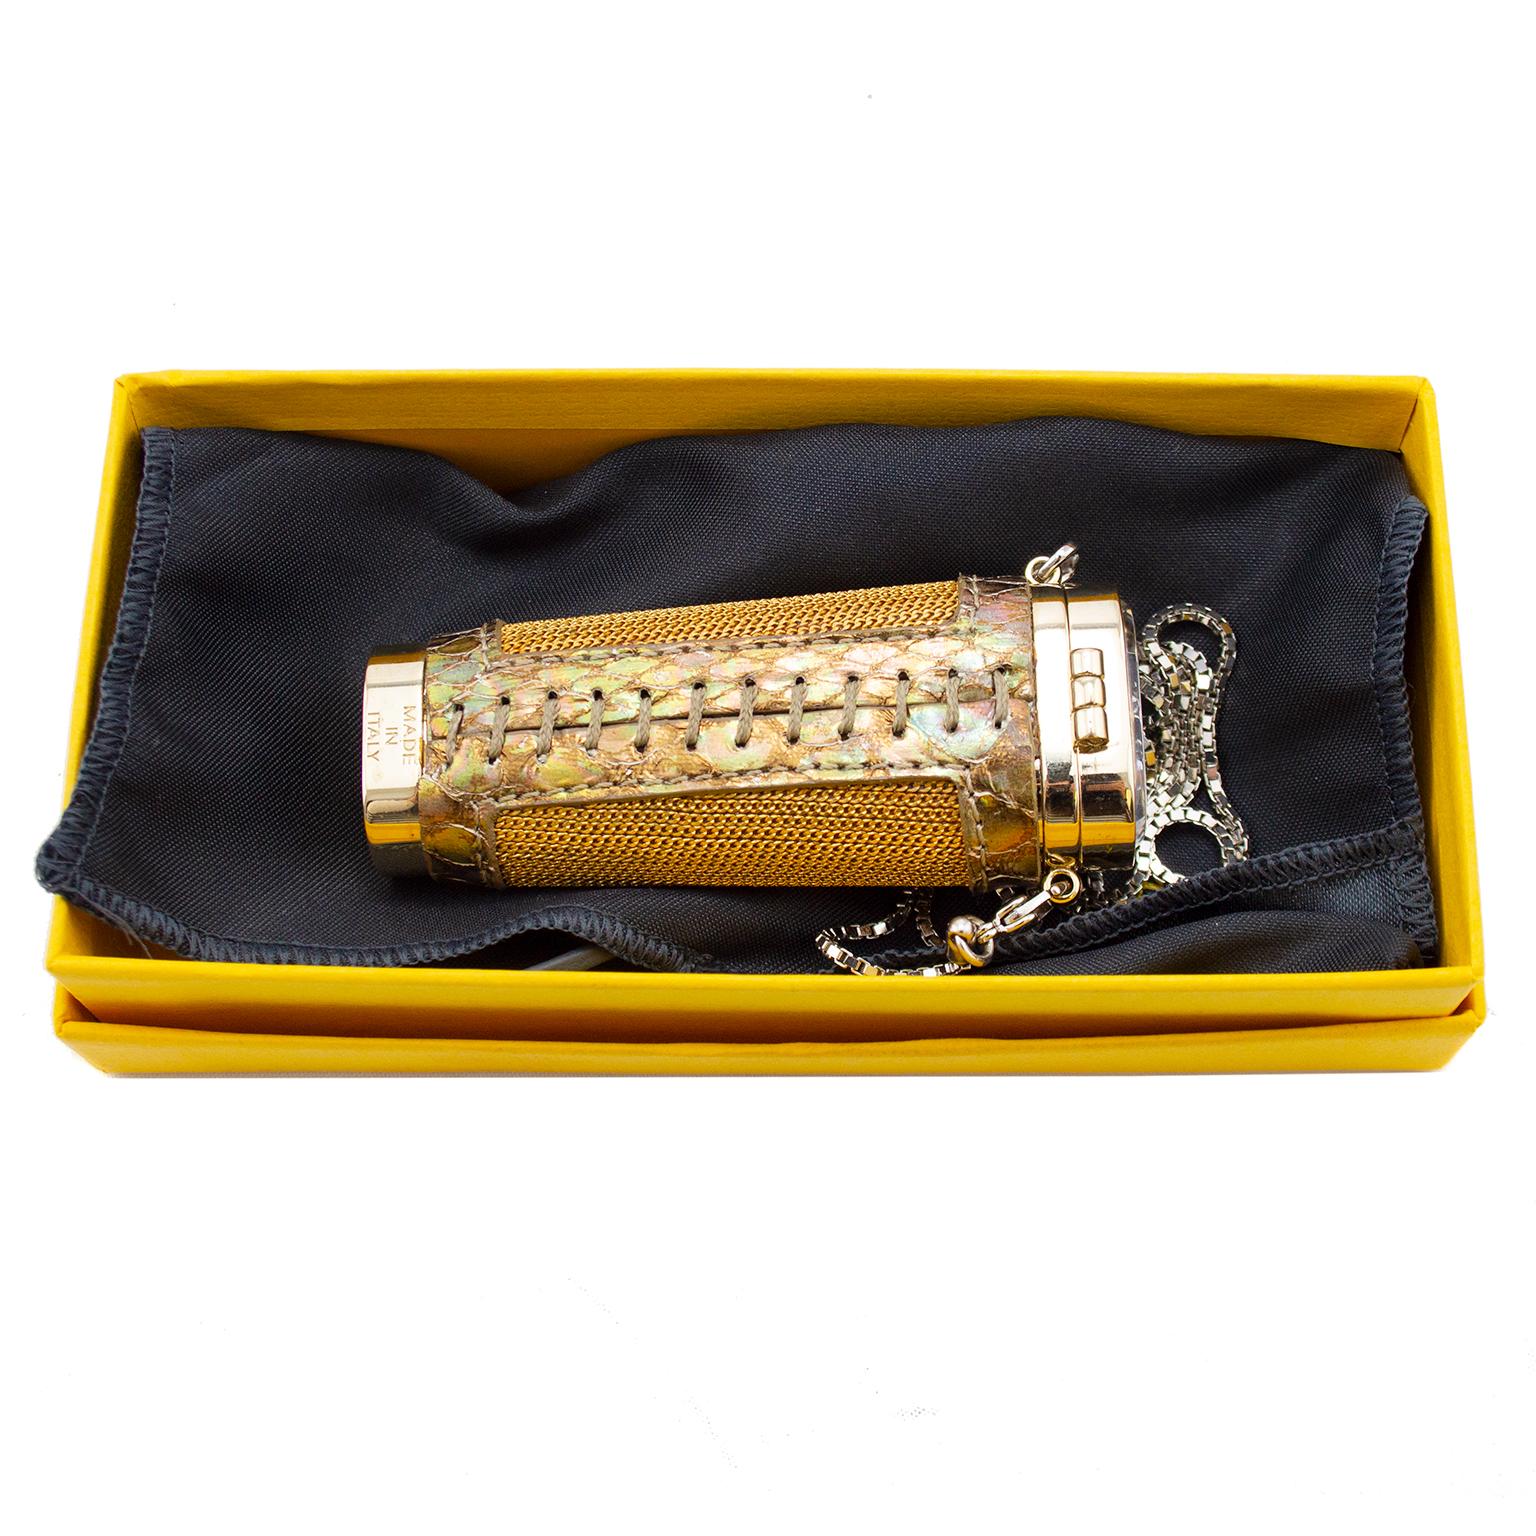 Novelty Fendi mid 1990's hanging chain necklace with hard case object holder. It appears to have been designed to hold a disposable cigarette lighter. Gilded metal chain mail detail around the sides with stamped hard flip top and slightly tapered